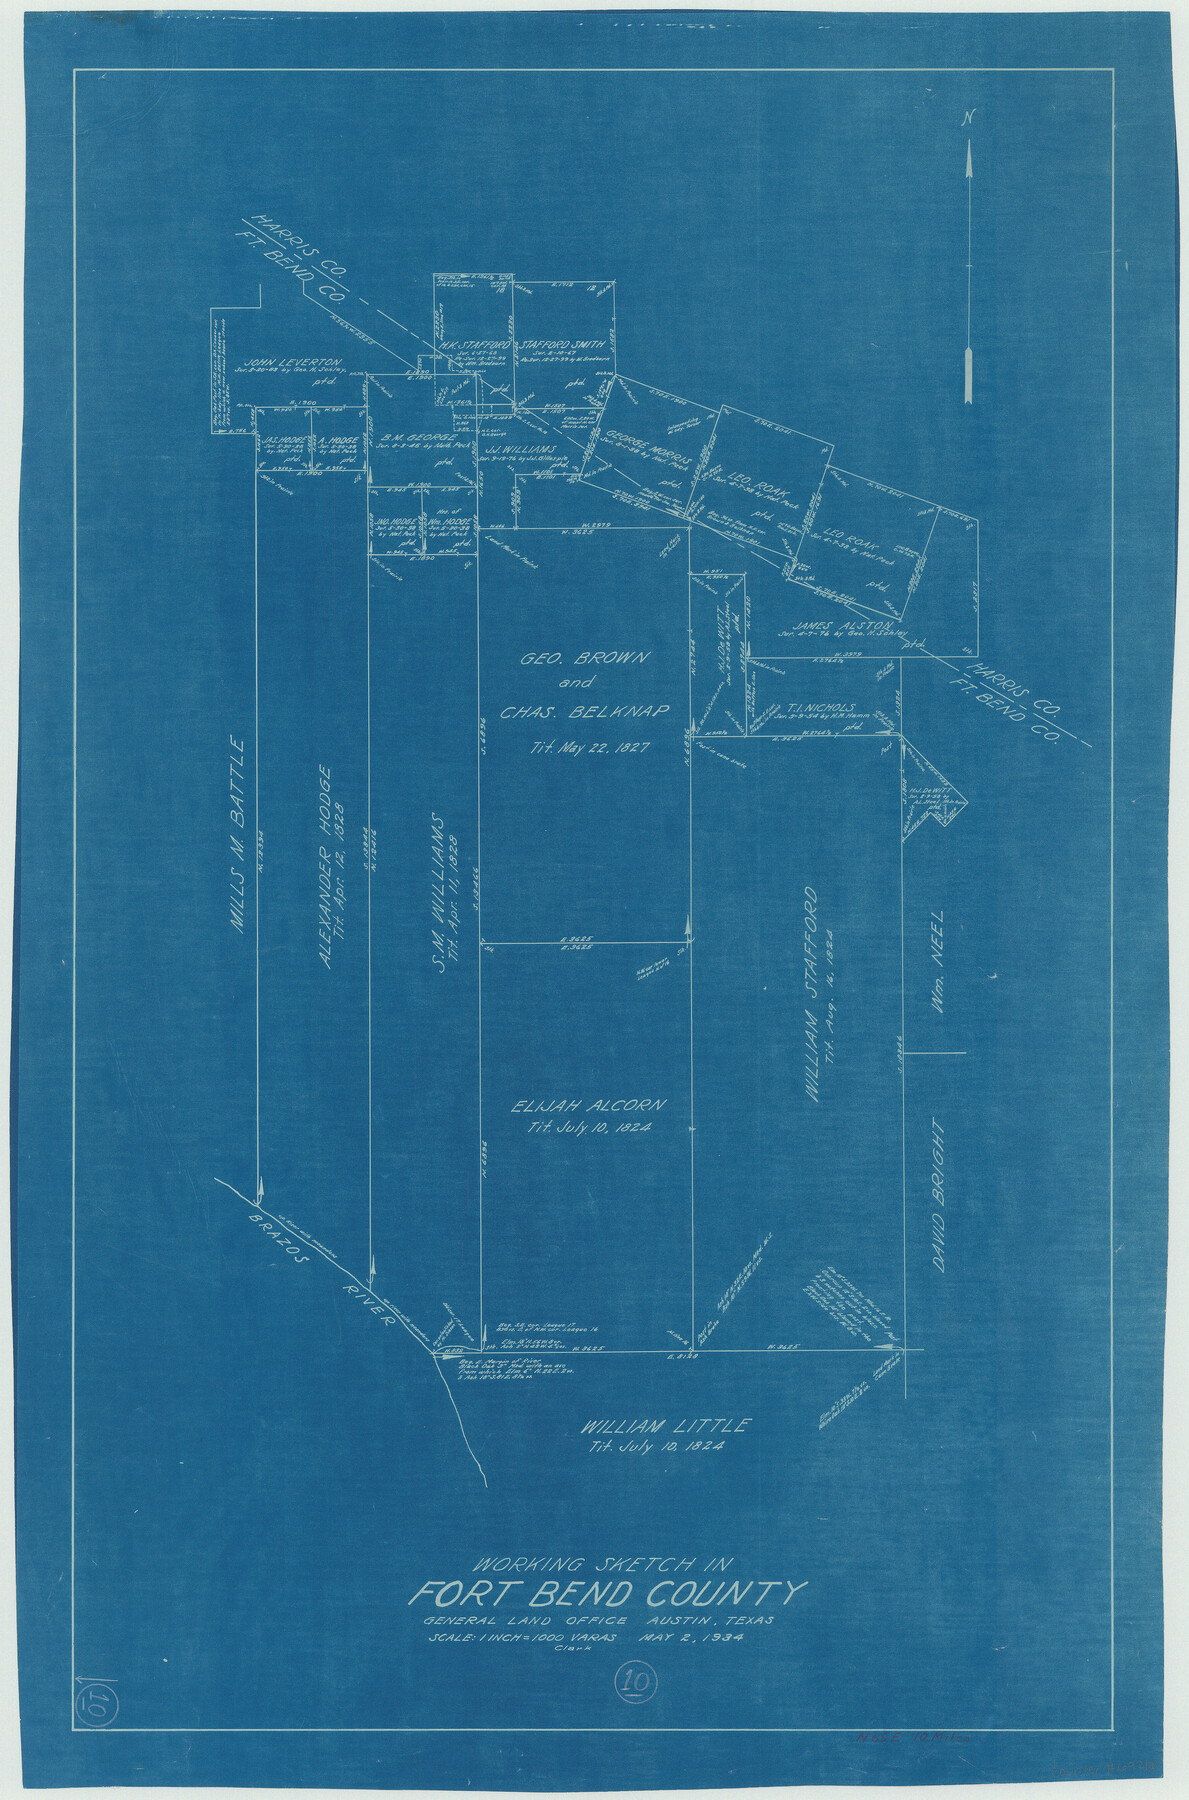 69216, Fort Bend County Working Sketch 10, General Map Collection